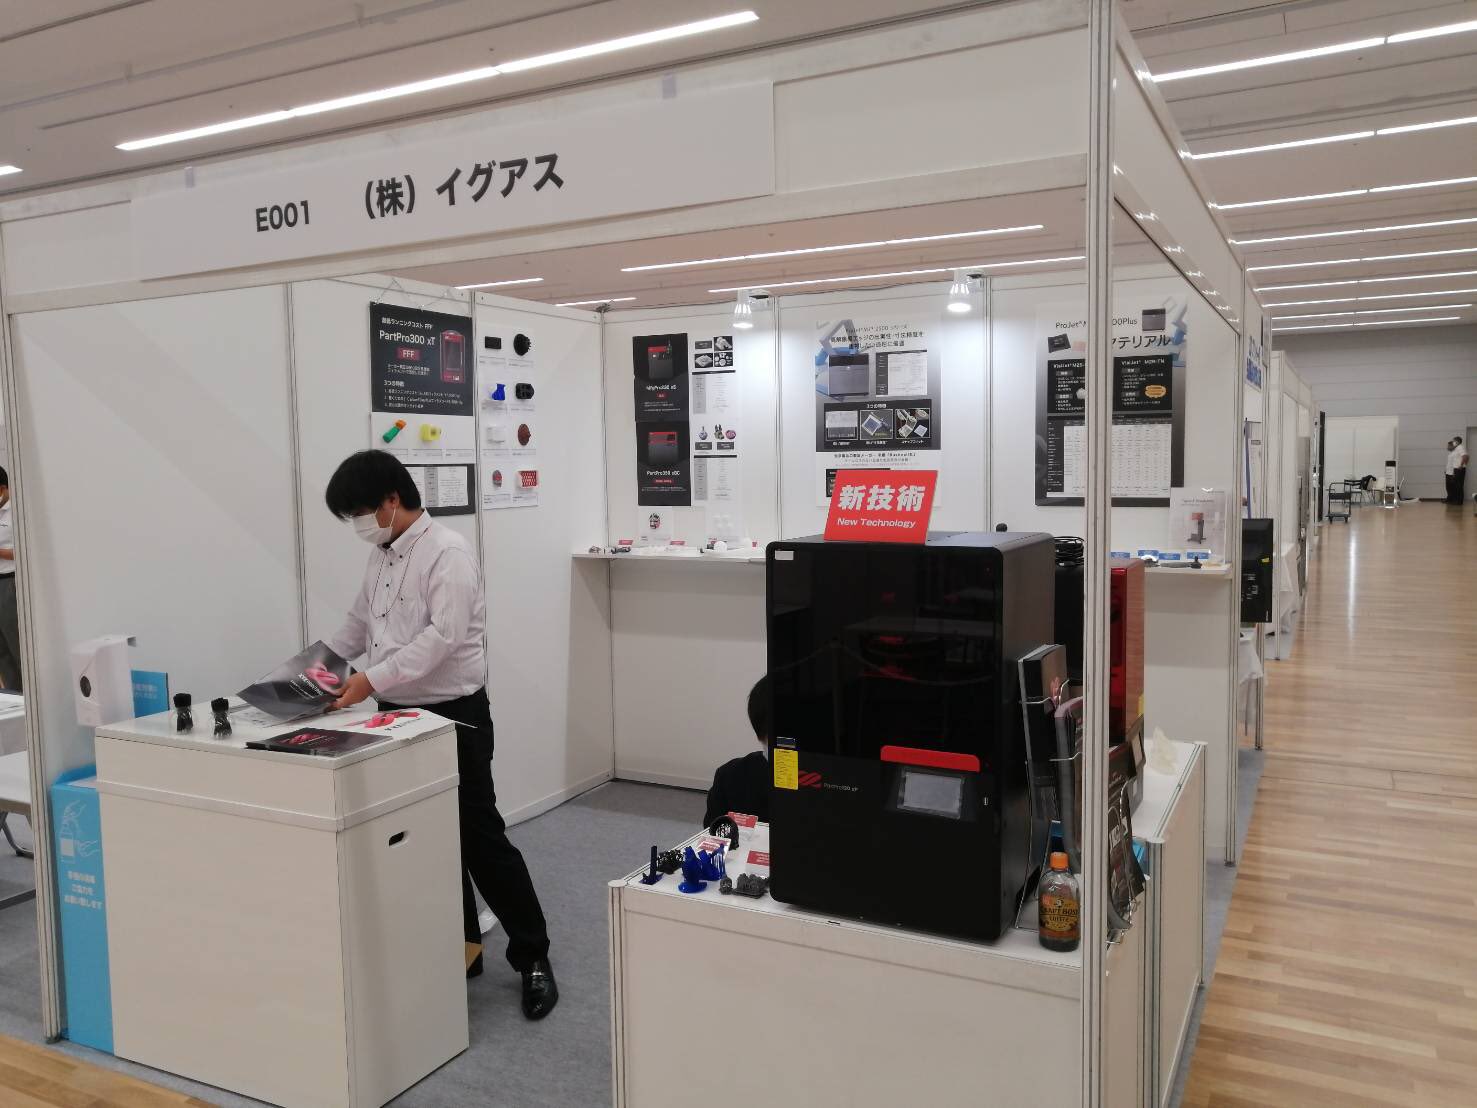 The pandemic continues to limit the attendances of physical 3D printing events, and Formnext Forum Tokyo has just 710 visitors. Photo via XYZprinting.